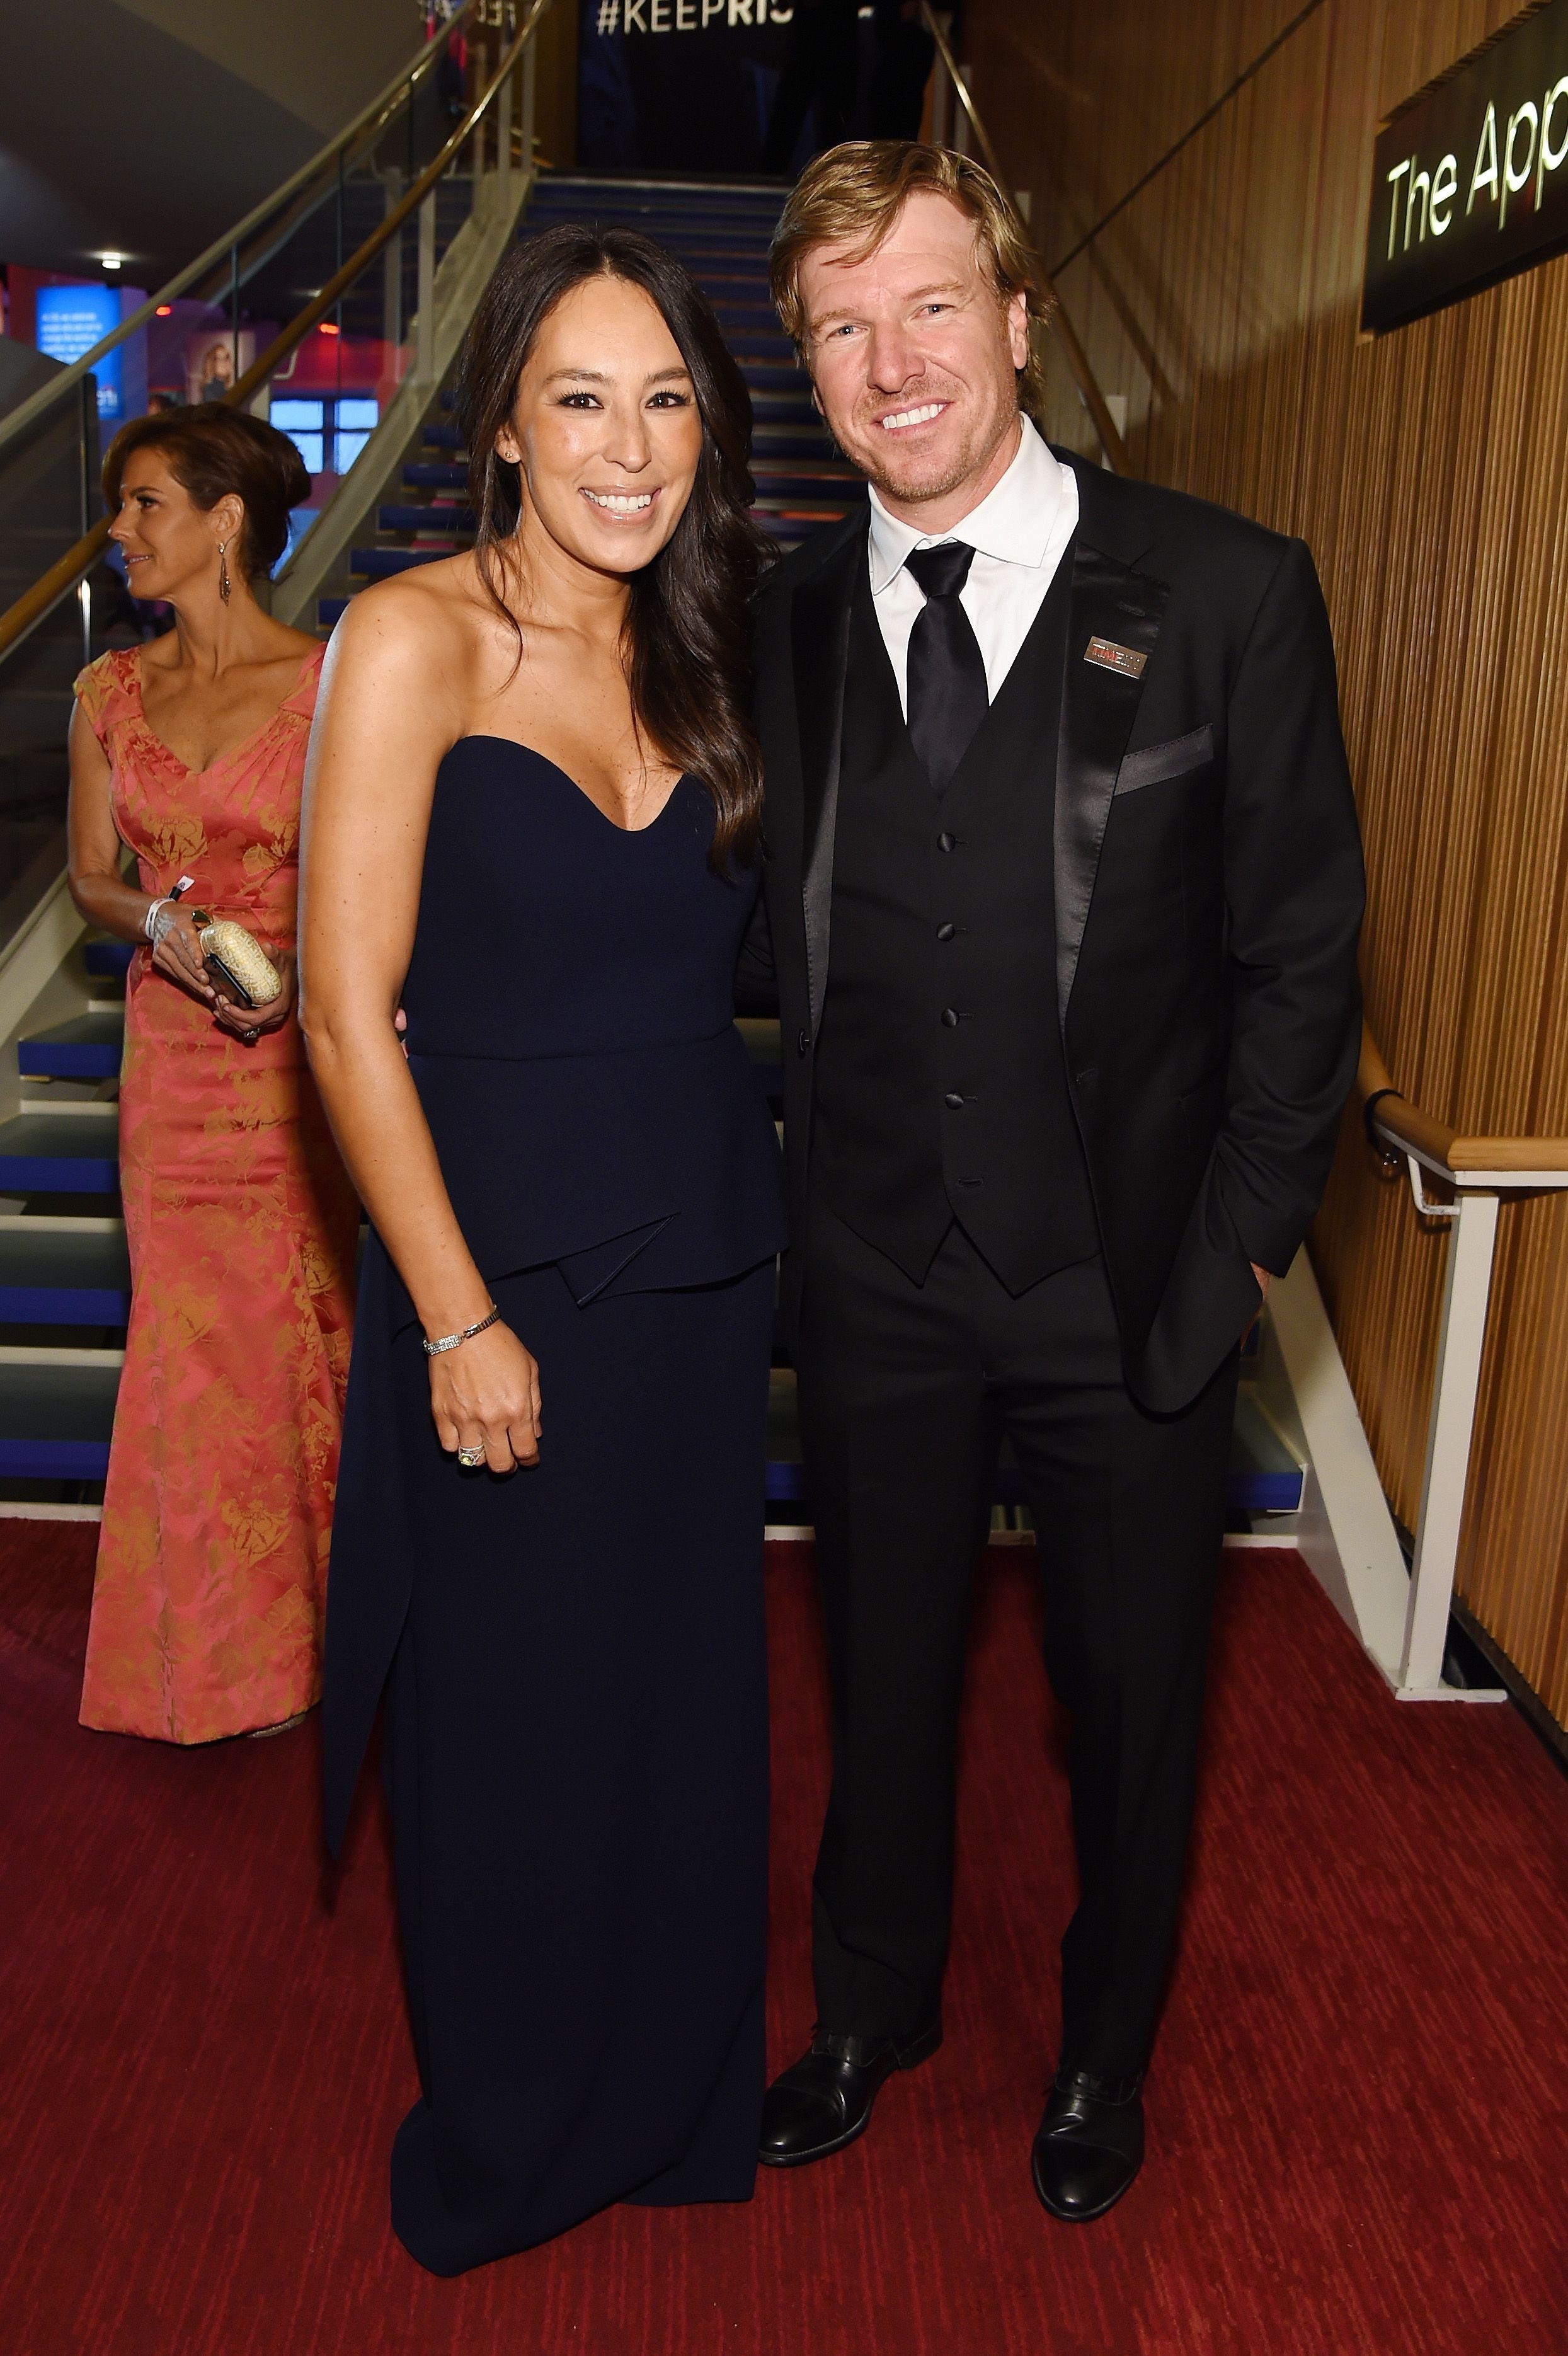 Joanna and Chip Gaines at the TIME 100 Gala Cocktails at Jazz at Lincoln Center on April 23, 2019 in New York City. | Photo: Getty Images